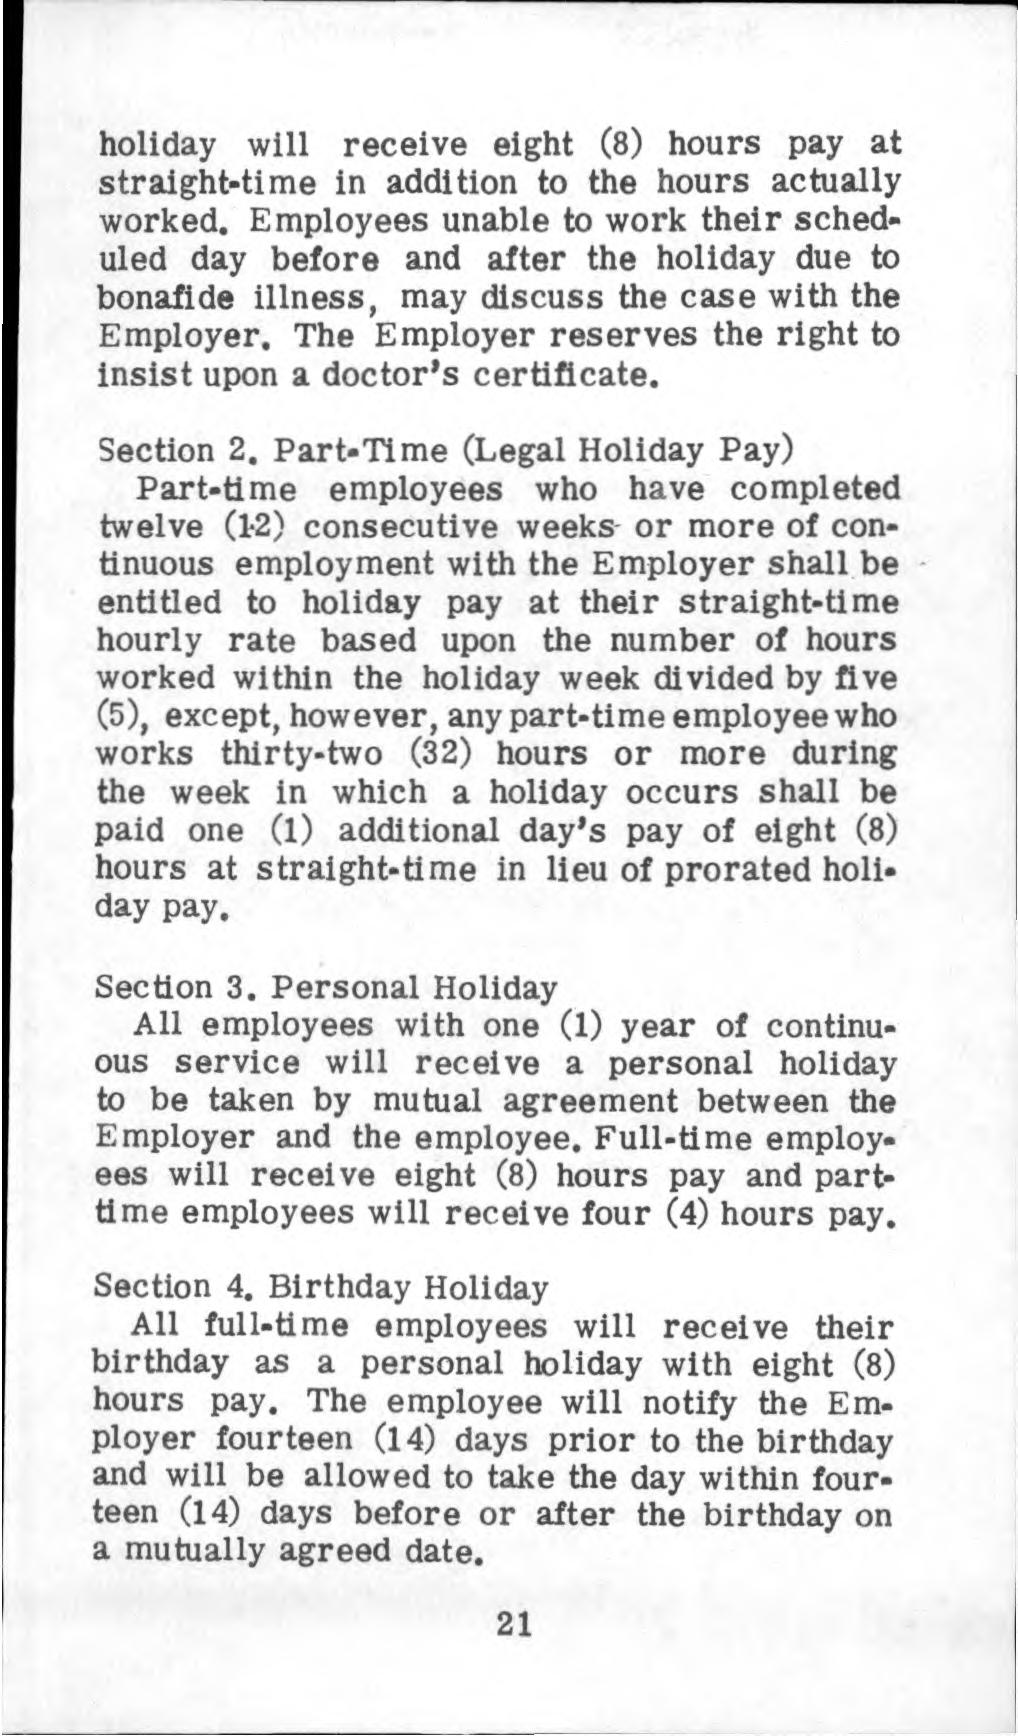 holiday will receive eight (8) hours pay at straight-time in addition to the hours actually worked.